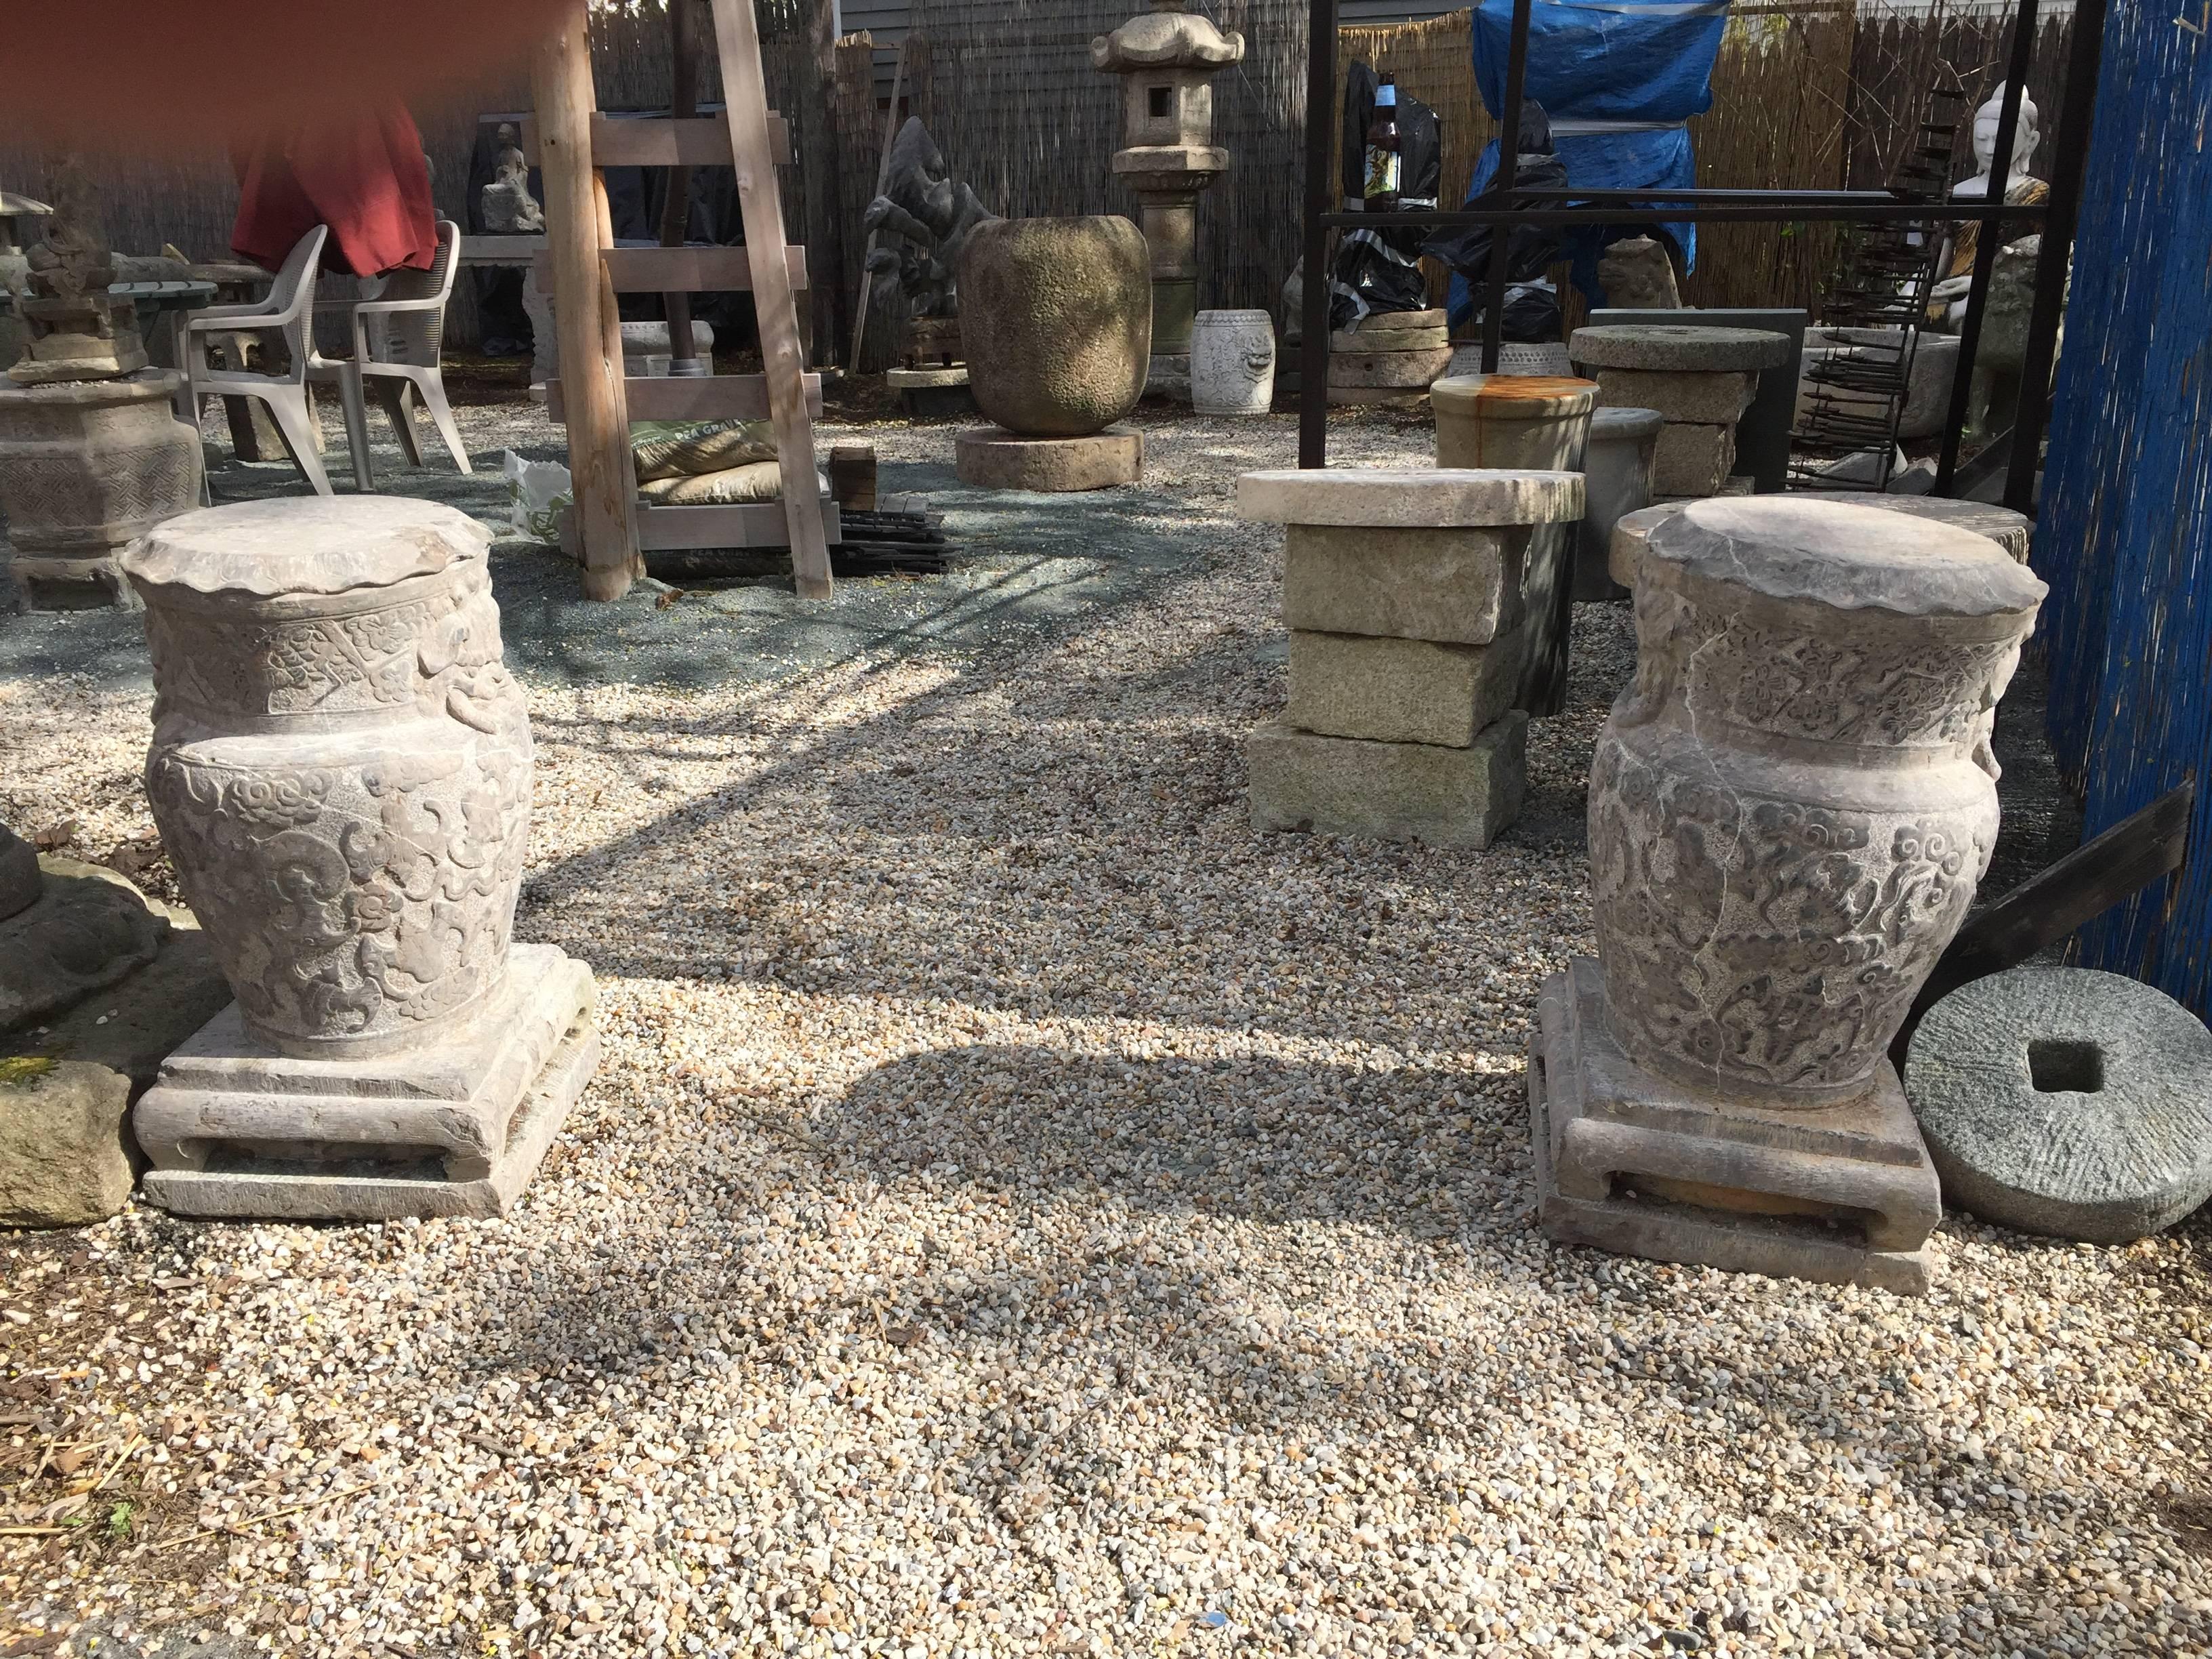 For your special garden

This substantial pair of older Chinese hand-carved solid limestone pedestals would make fine display bases for your favourite indoor or outdoor flower pots or sculptures. They might also decorate an impressive entry to your